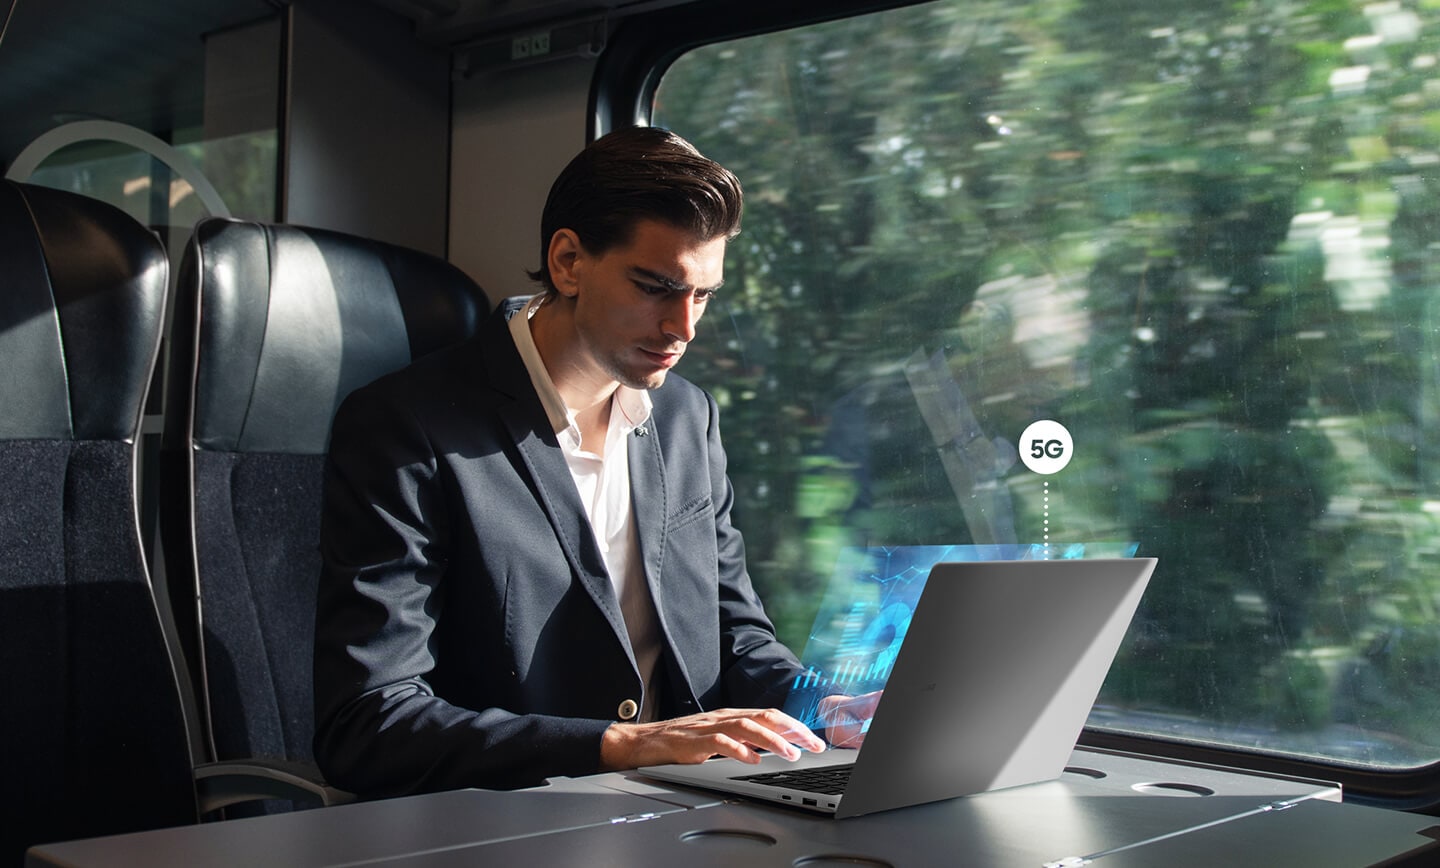 A man is using Galaxy Book2 Go in a window seat on a moving train. 5G symbol is shown above the laptop.